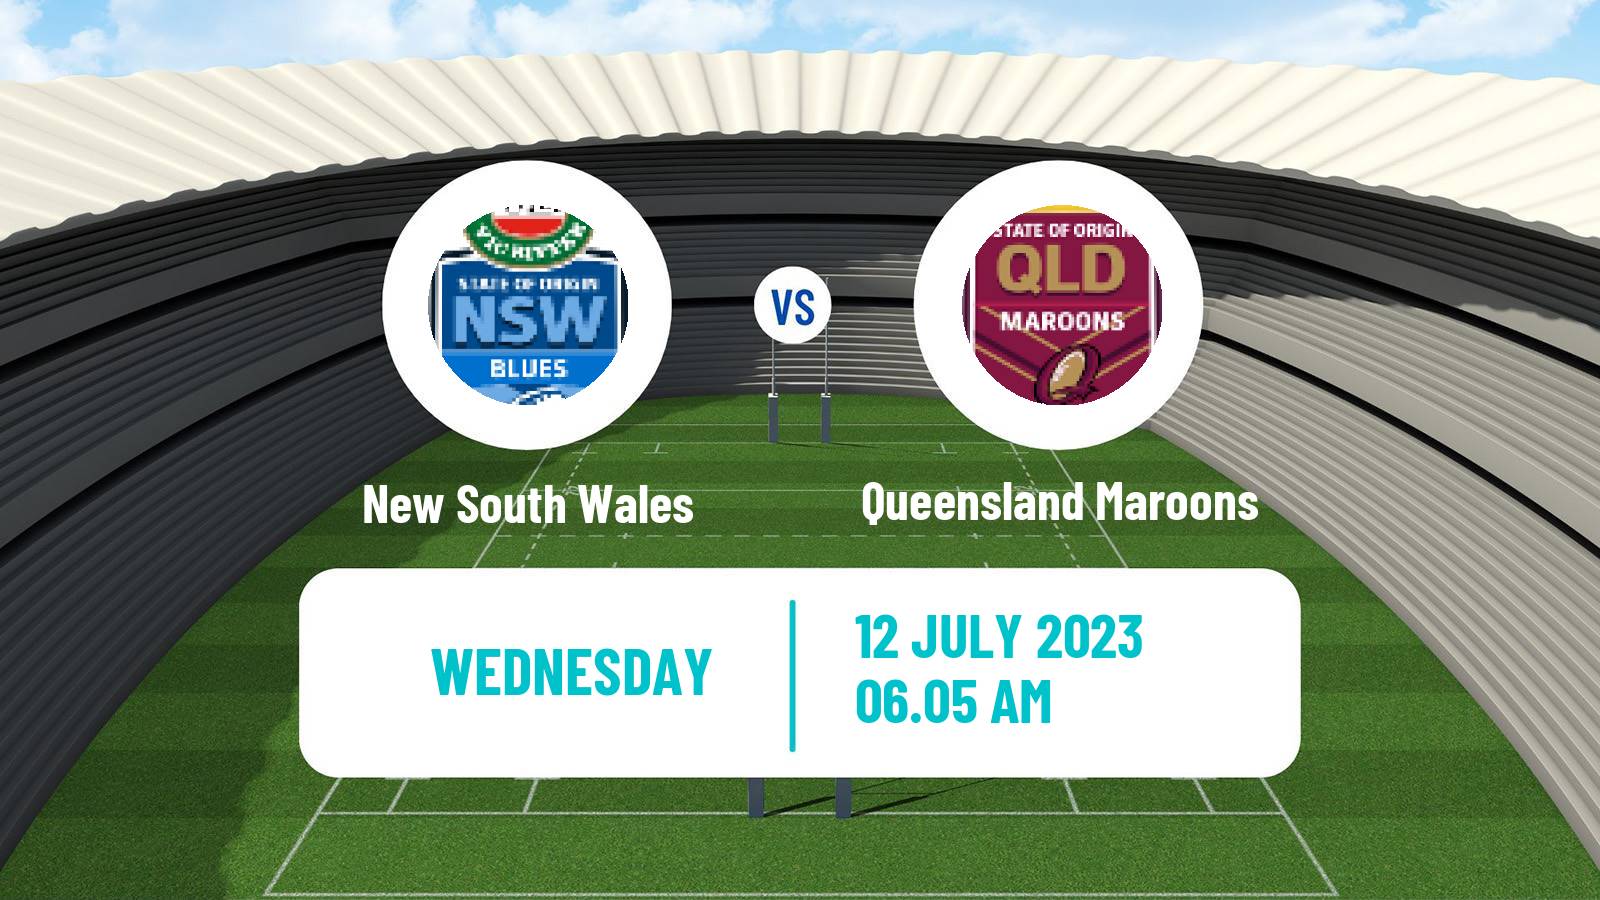 Rugby league Australian State of Origin New South Wales - Queensland Maroons